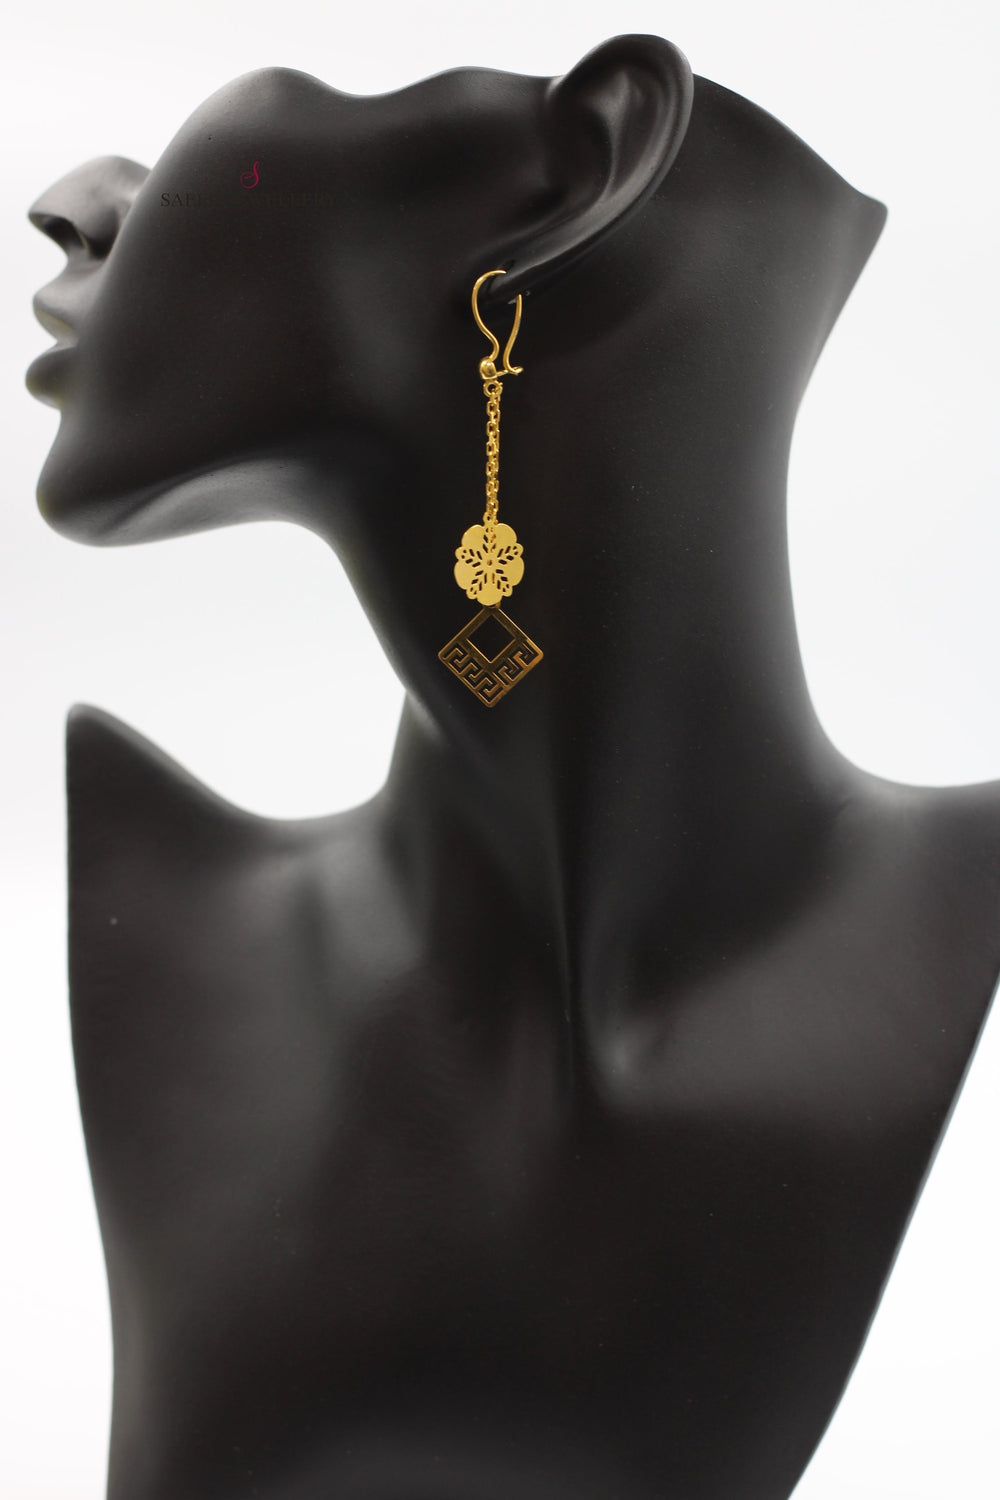 21K Fancy Earrings Made of 21K Yellow Gold by Saeed Jewelry-حلق-اكسترا-1